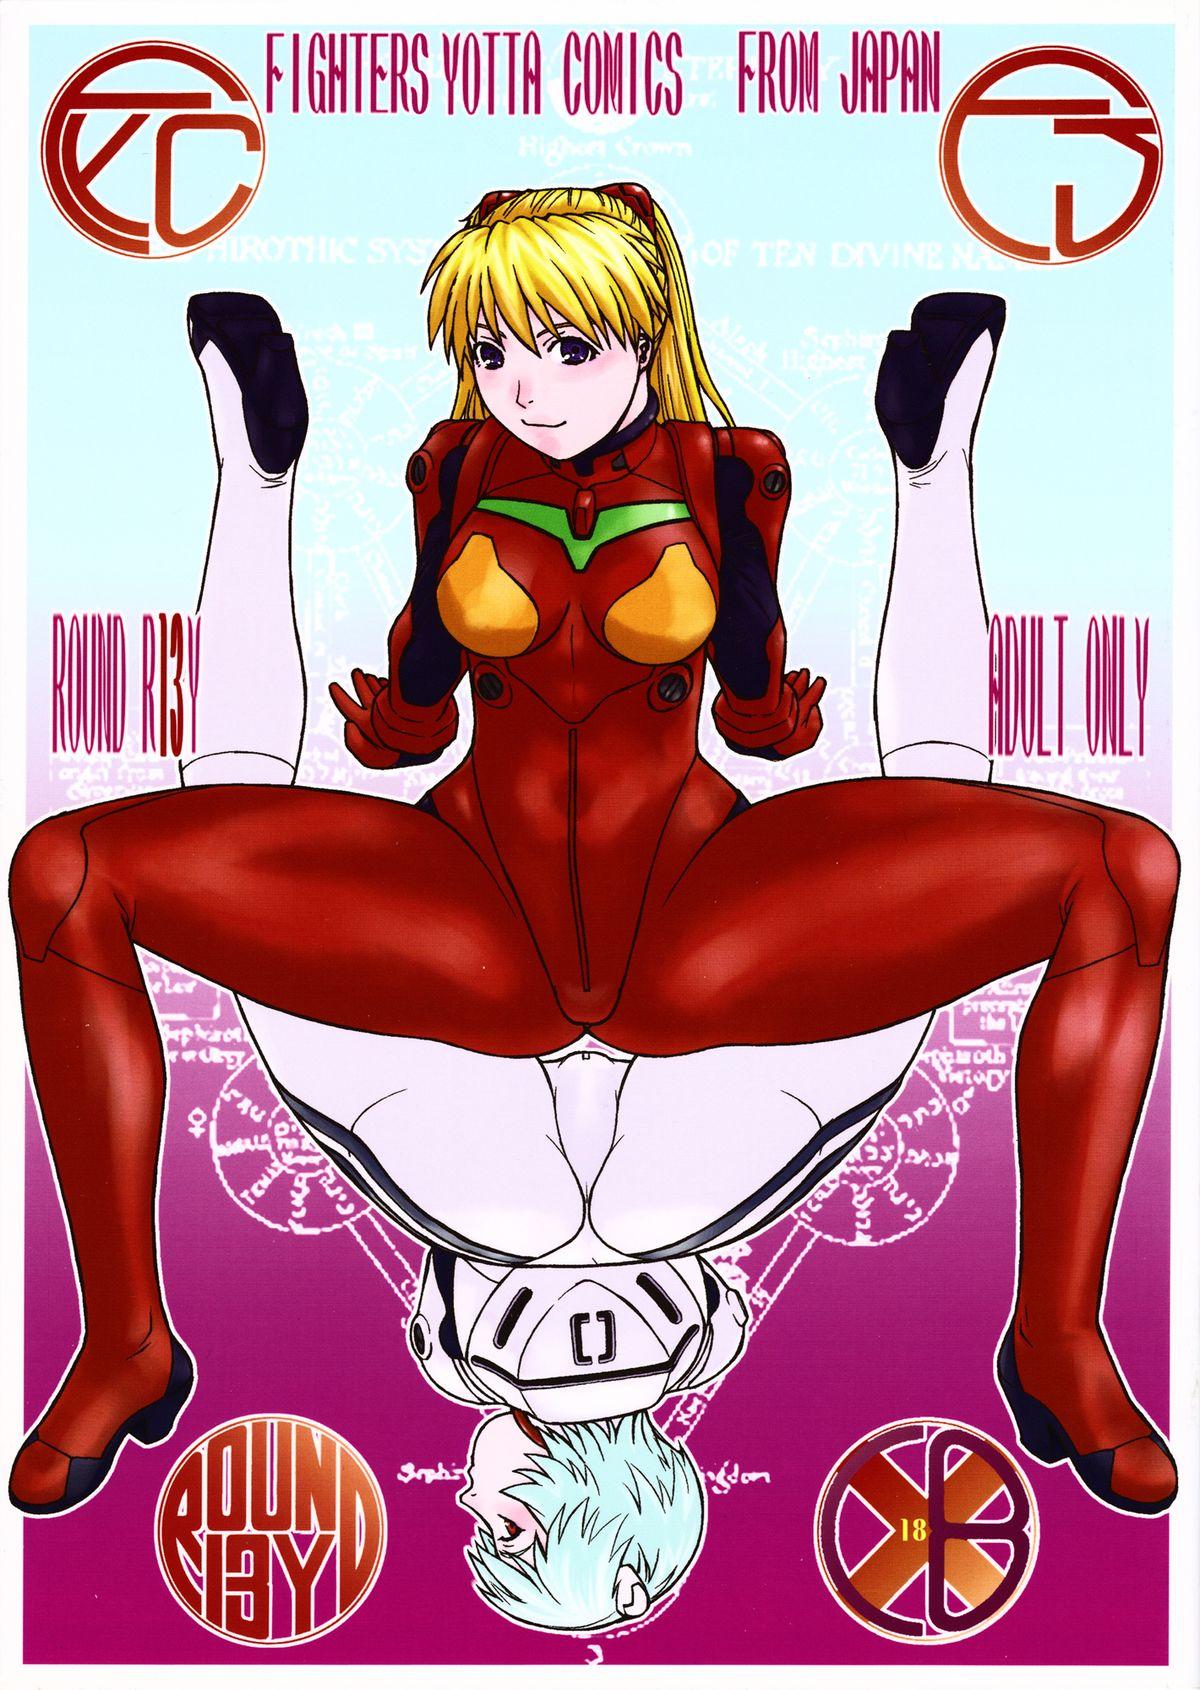 Oldvsyoung FYC R13Y - Neon genesis evangelion Street fighter Banging - Picture 1